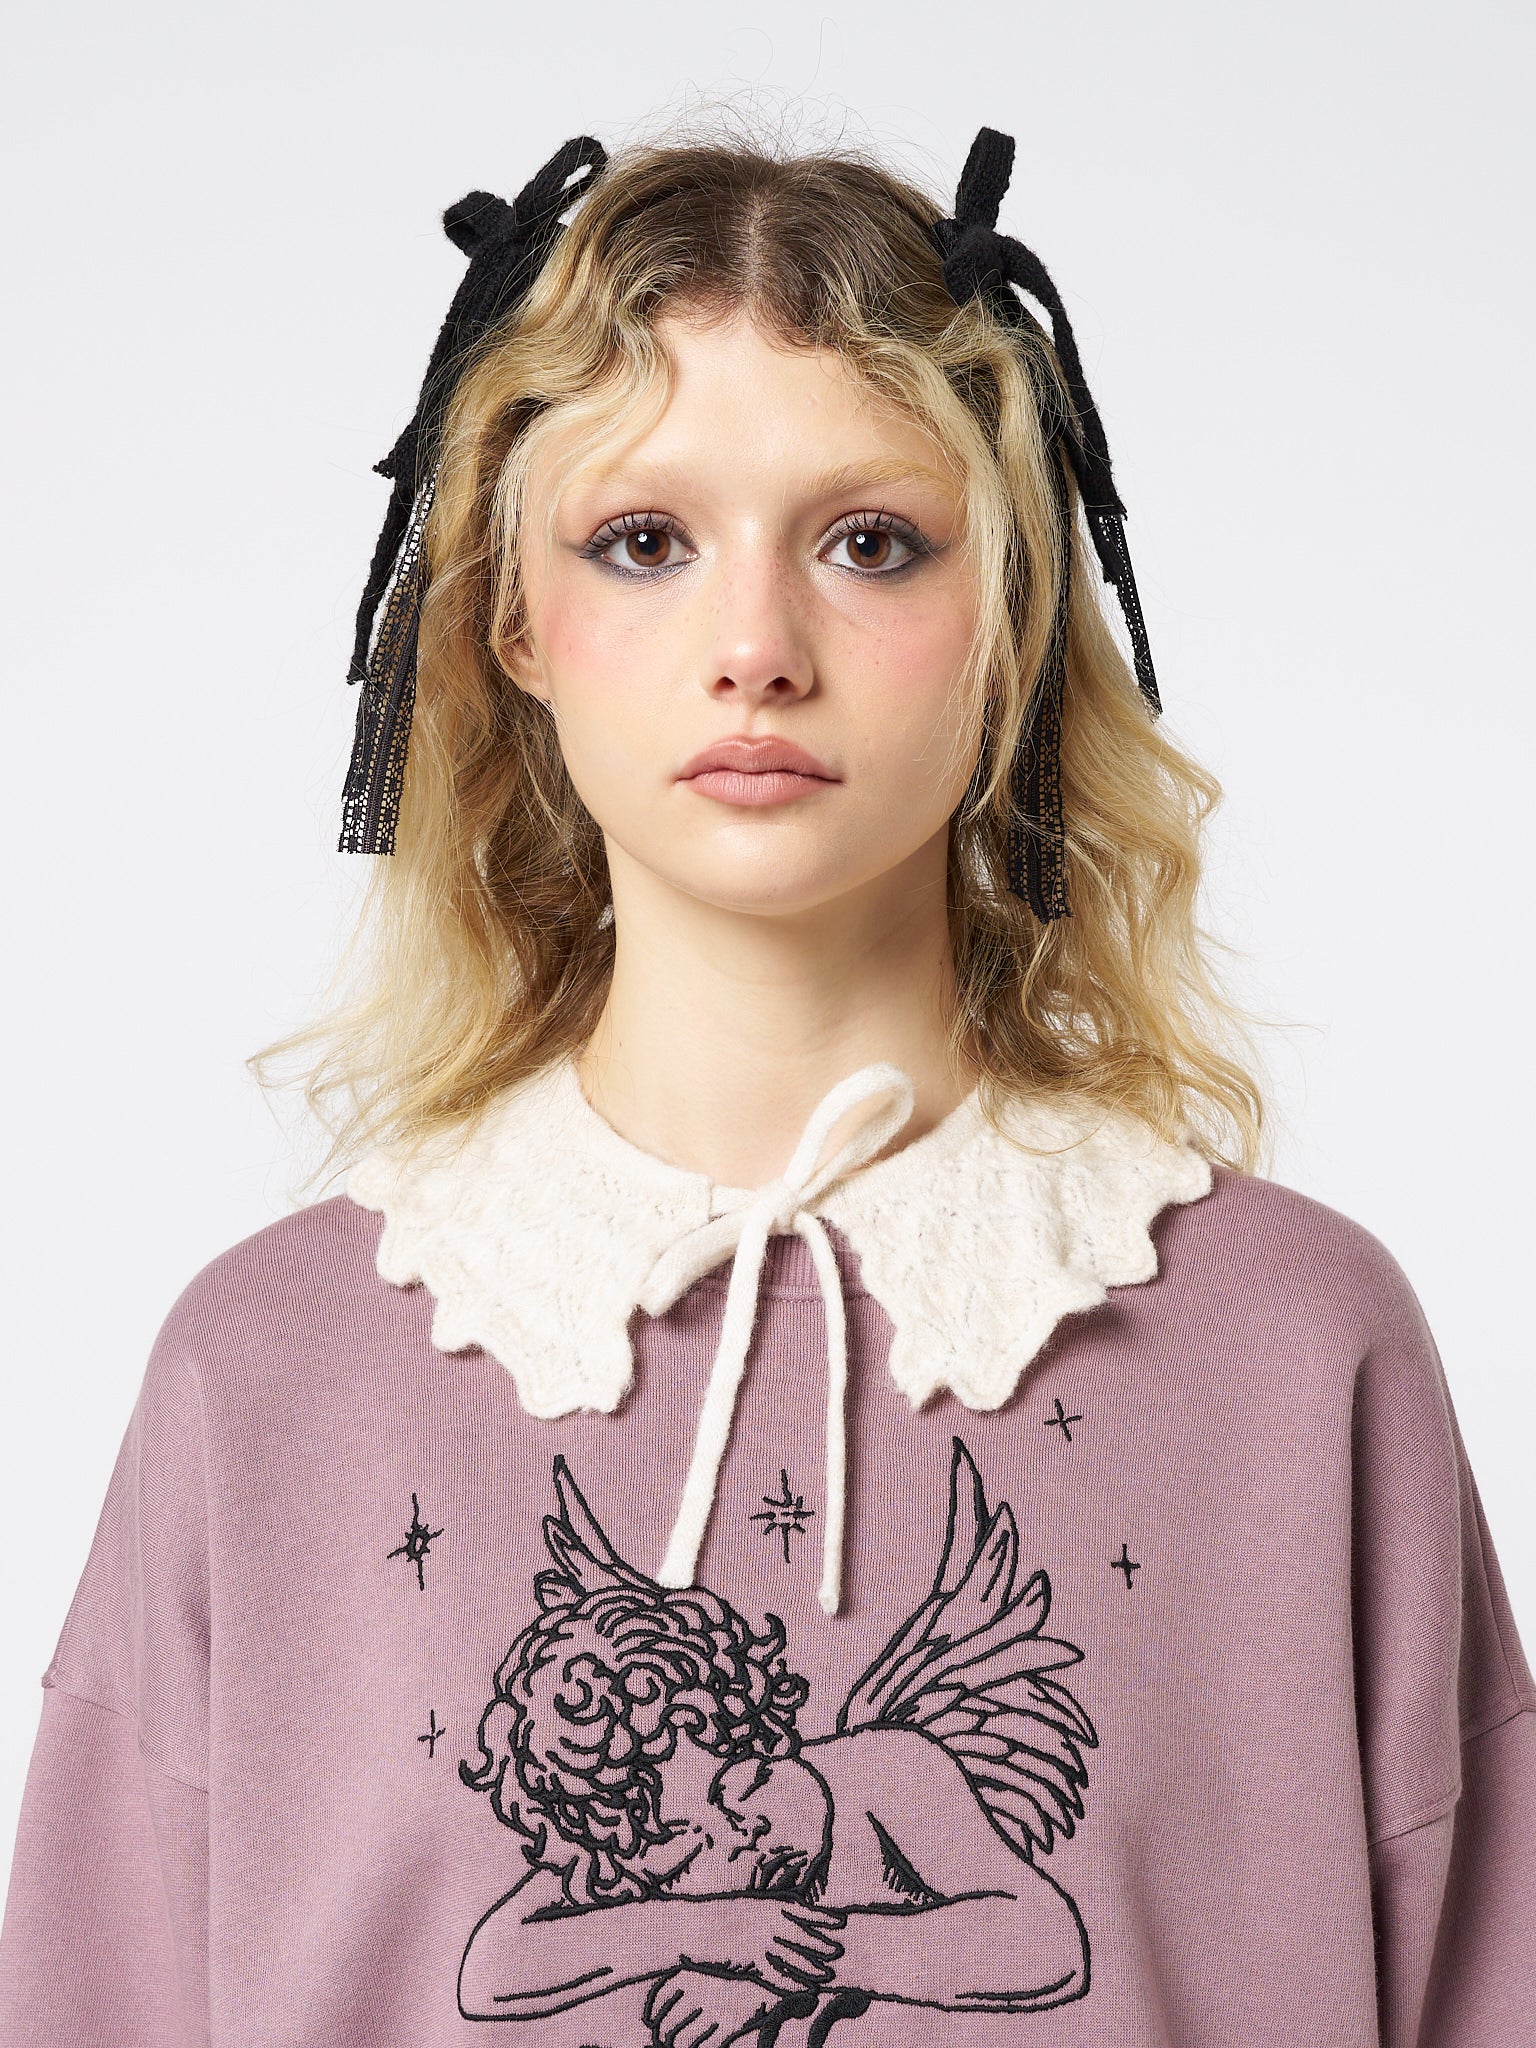 Add a touch of cuteness with this soft knitted collar featuring delicate patterns and charming frills.